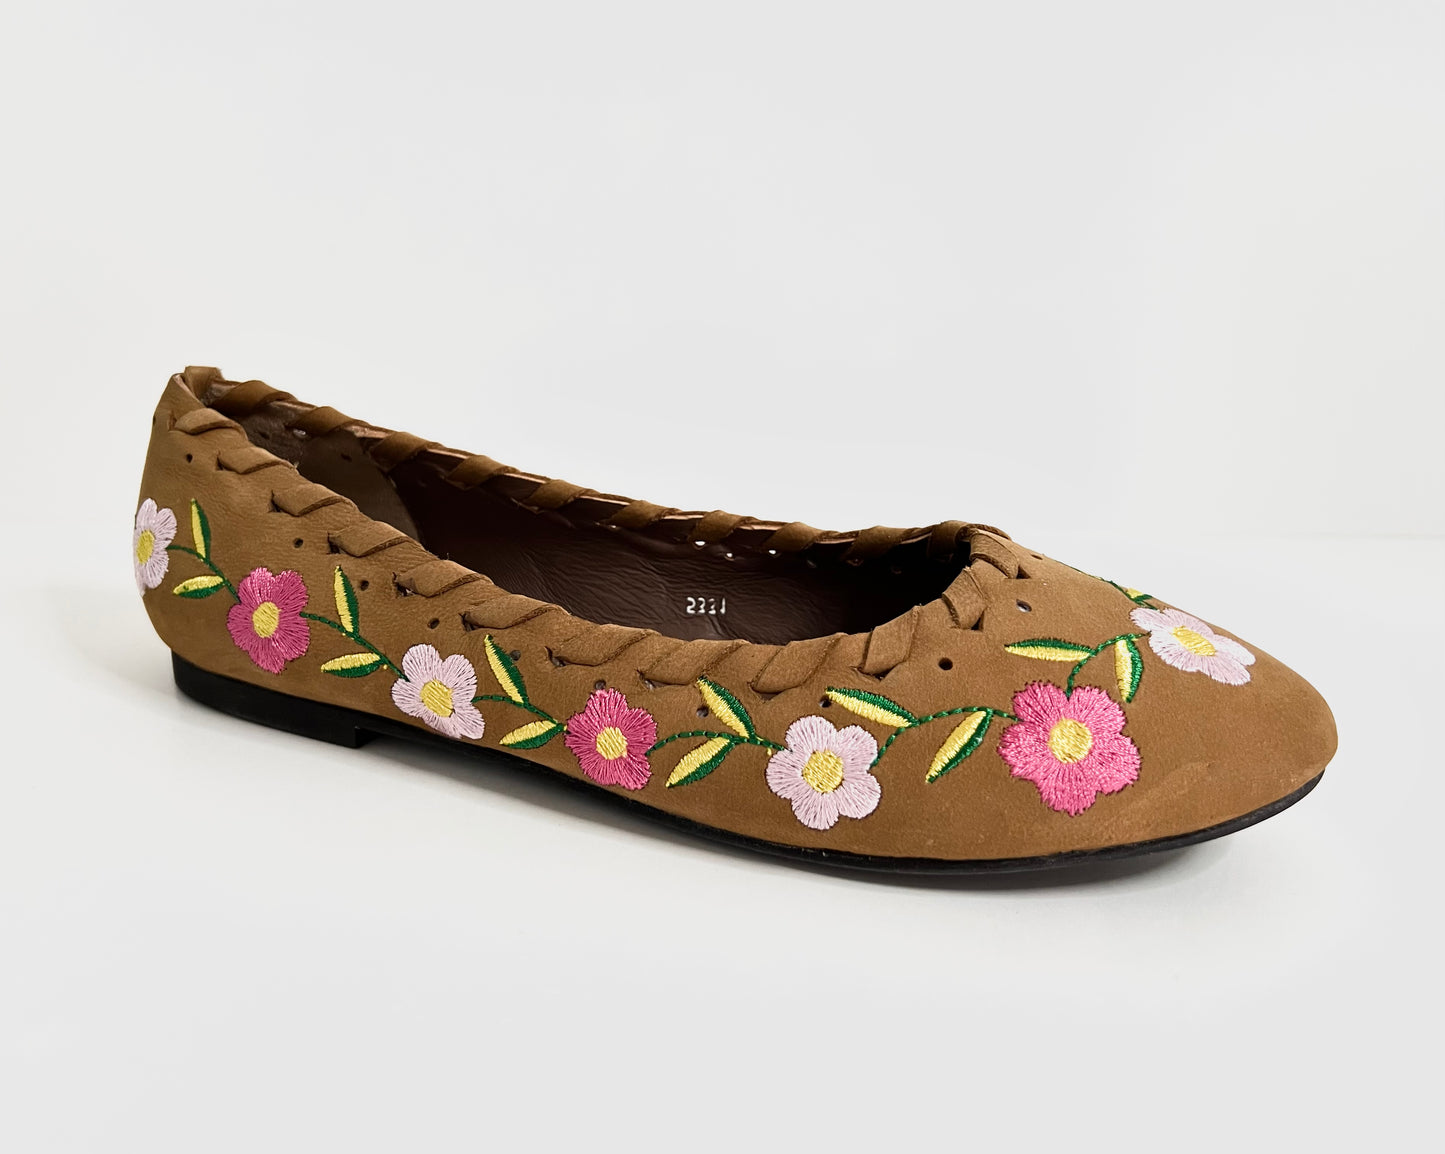 oobash June tan leather flower embroidered ballerina for ladies girl women